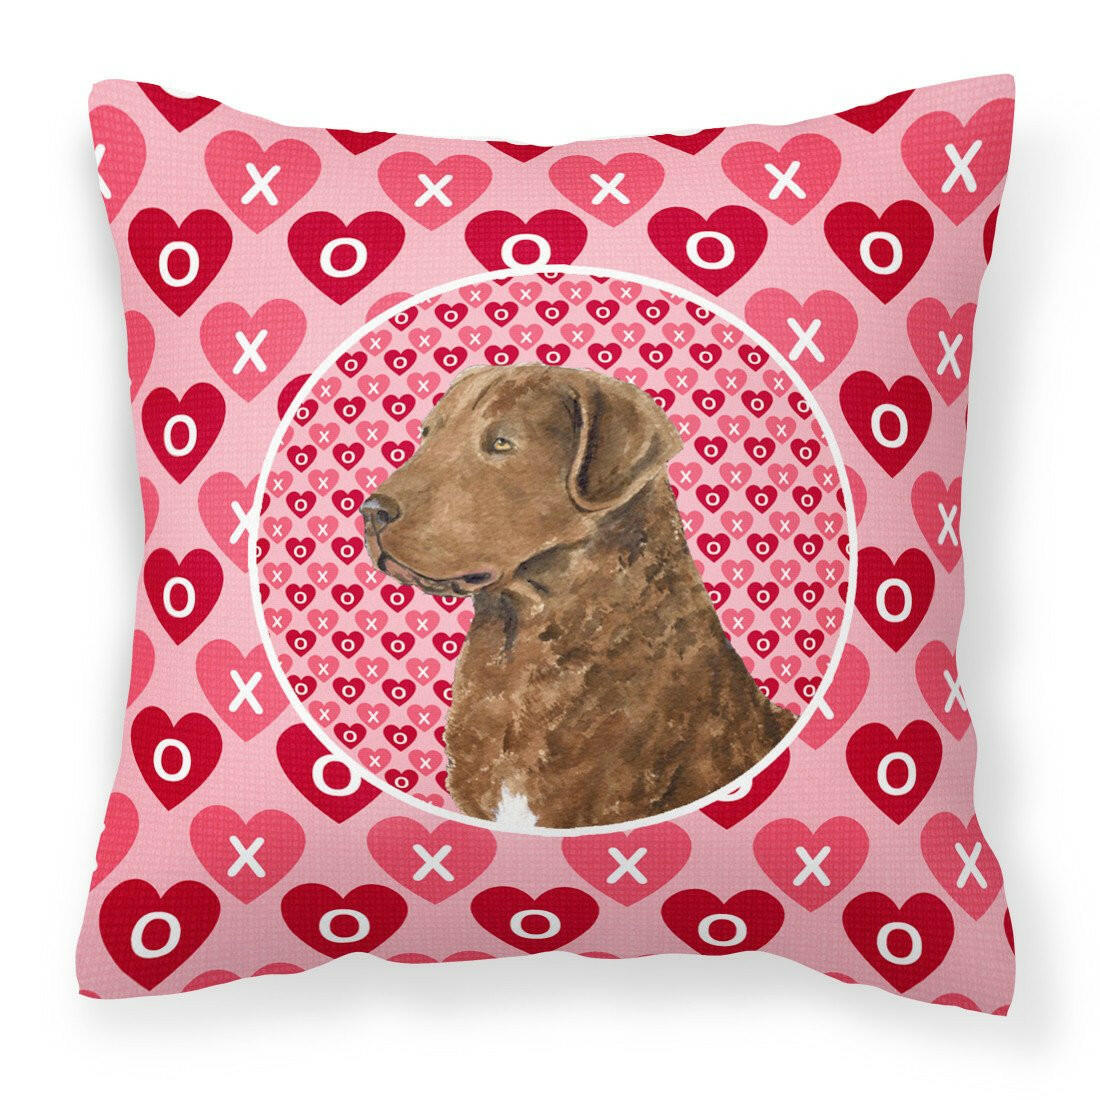 Chesapeake Bay Retriever Hearts Love and Valentine's Day Fabric Decorative Pillow SS4531PW1414 by Caroline's Treasures